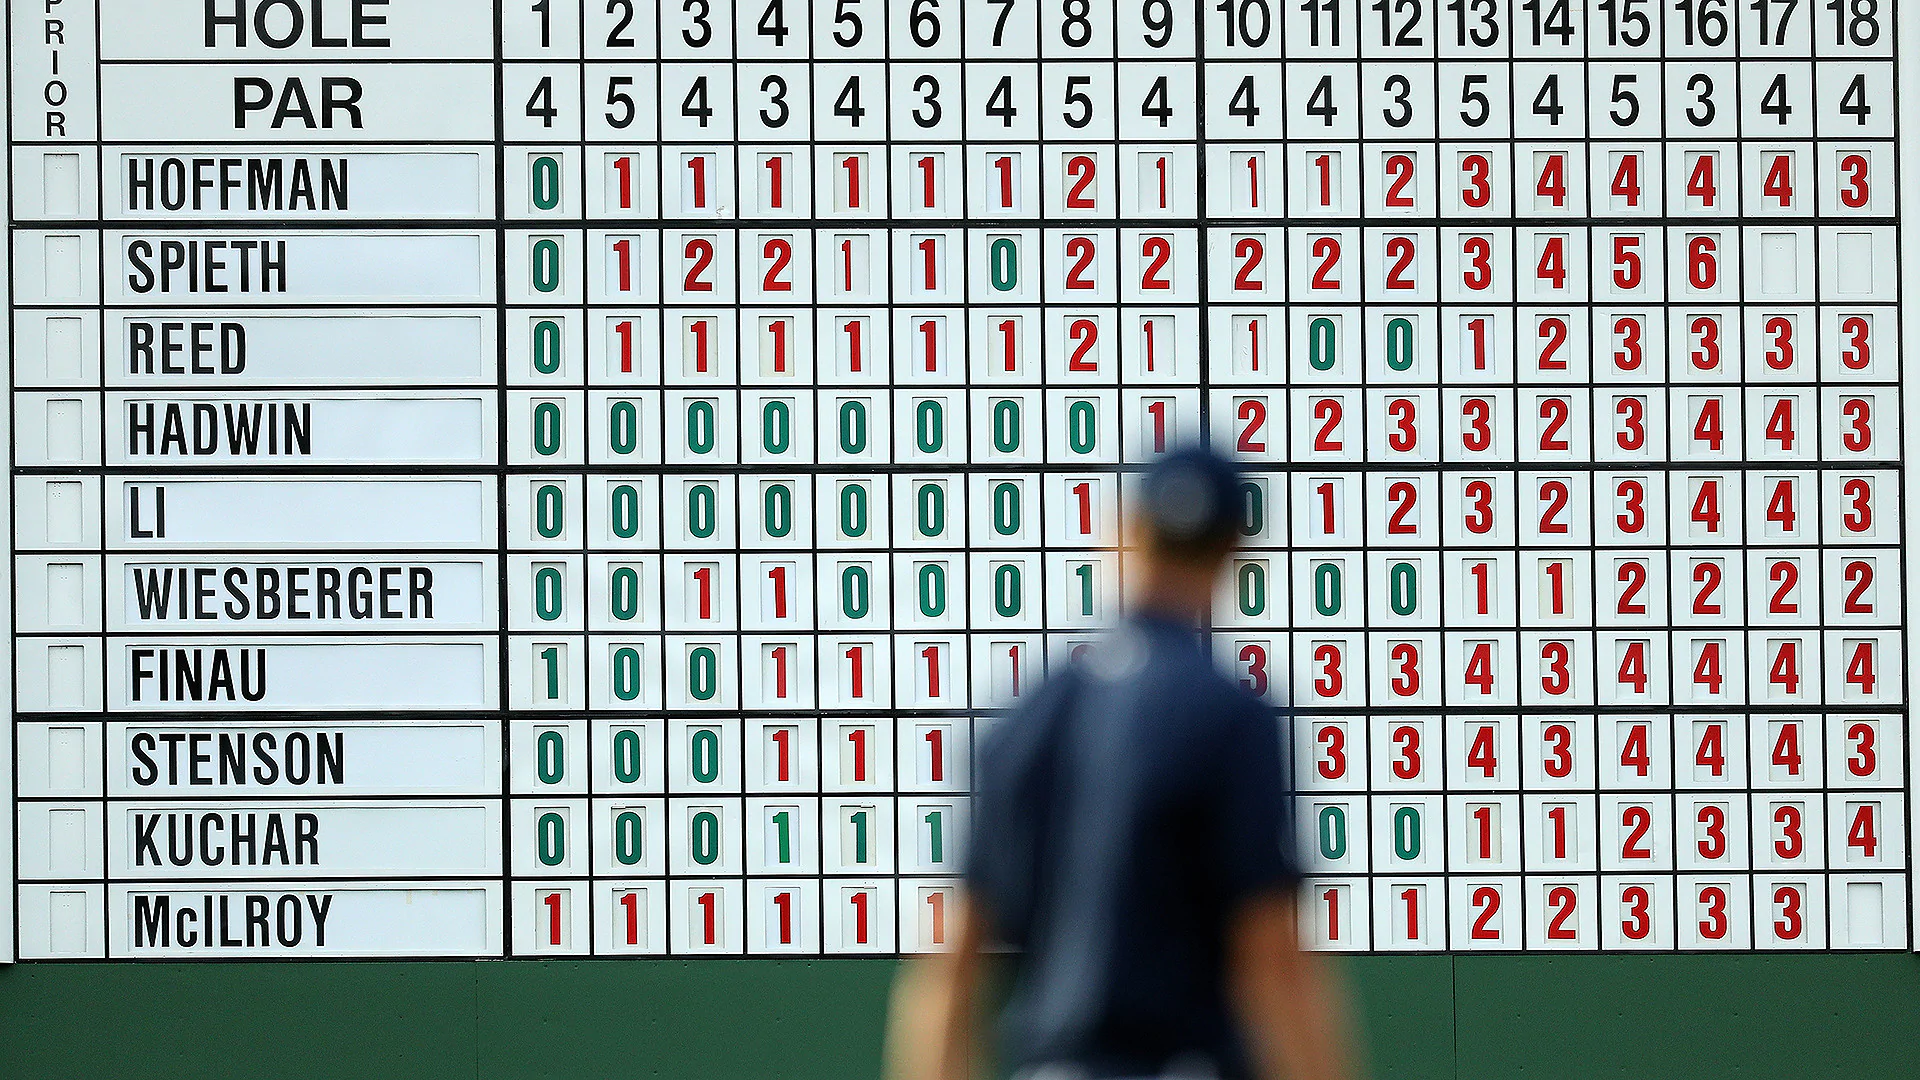 Look who's leading the Masters: Spieth (66) out front